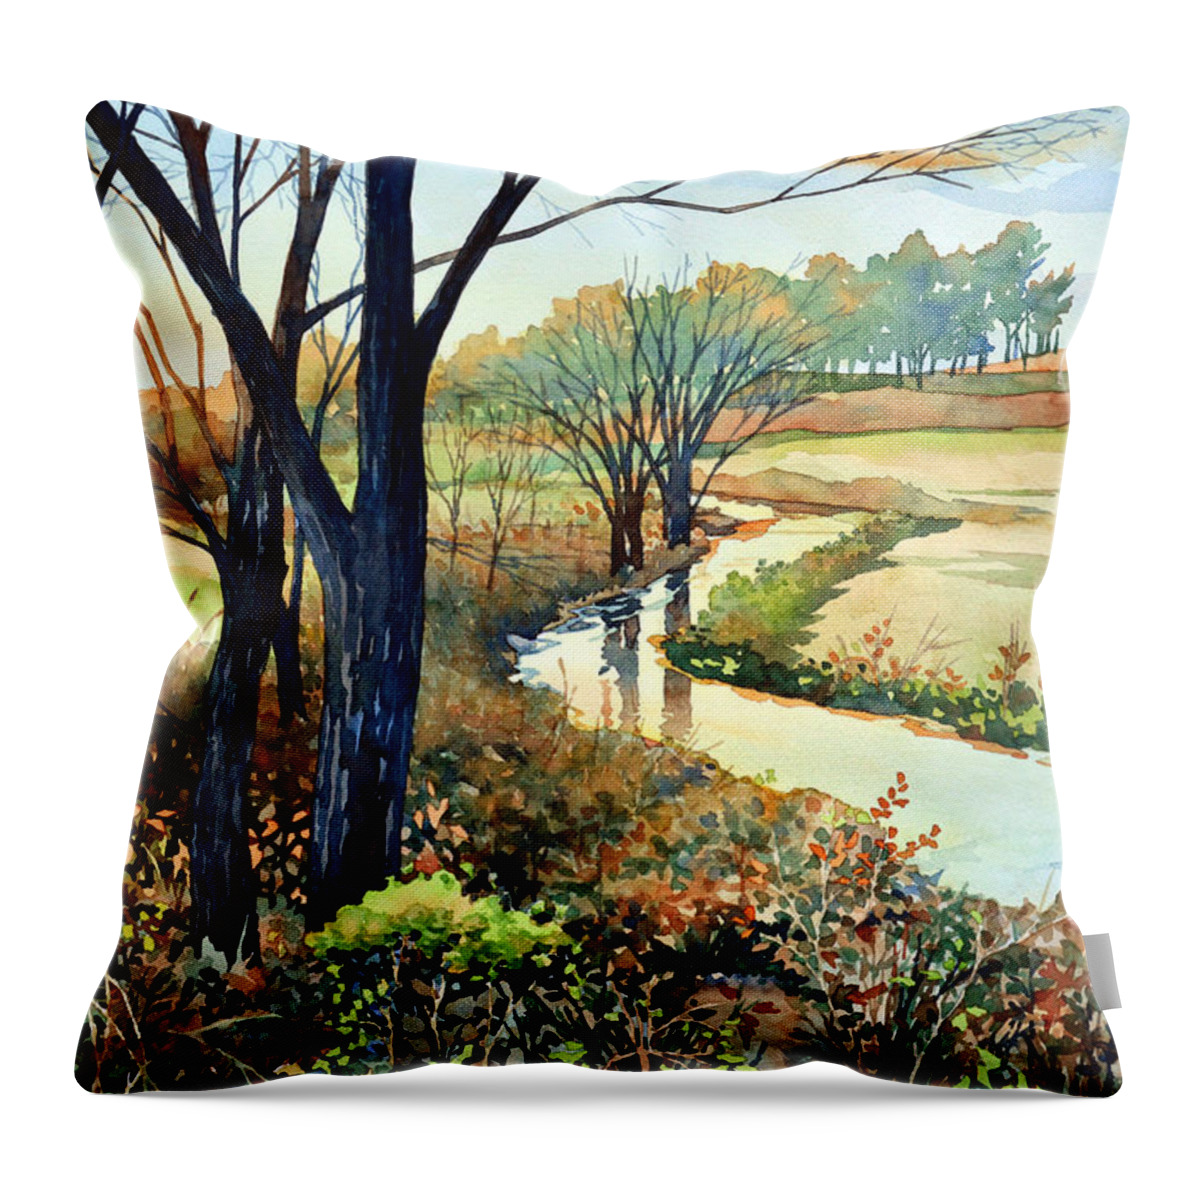 #watercolor #nature #landscape #stream #river #wild #green #sunset #art #painting Throw Pillow featuring the painting In the Wilds by Mick Williams